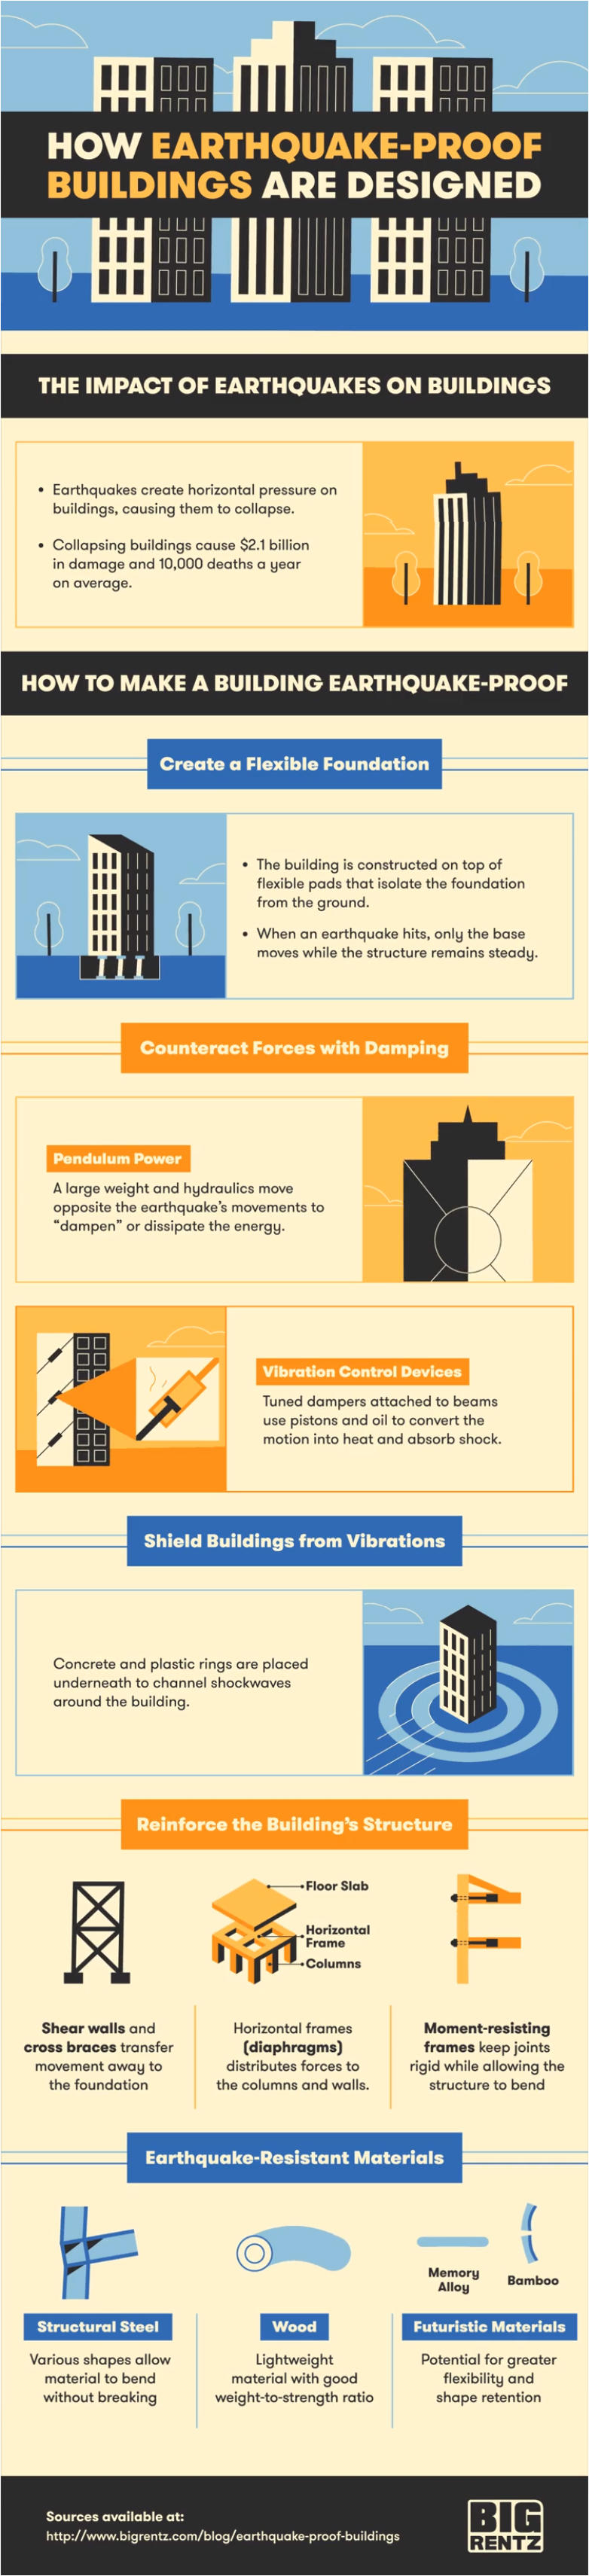 How Earthquake-proof Buildings Are Designed